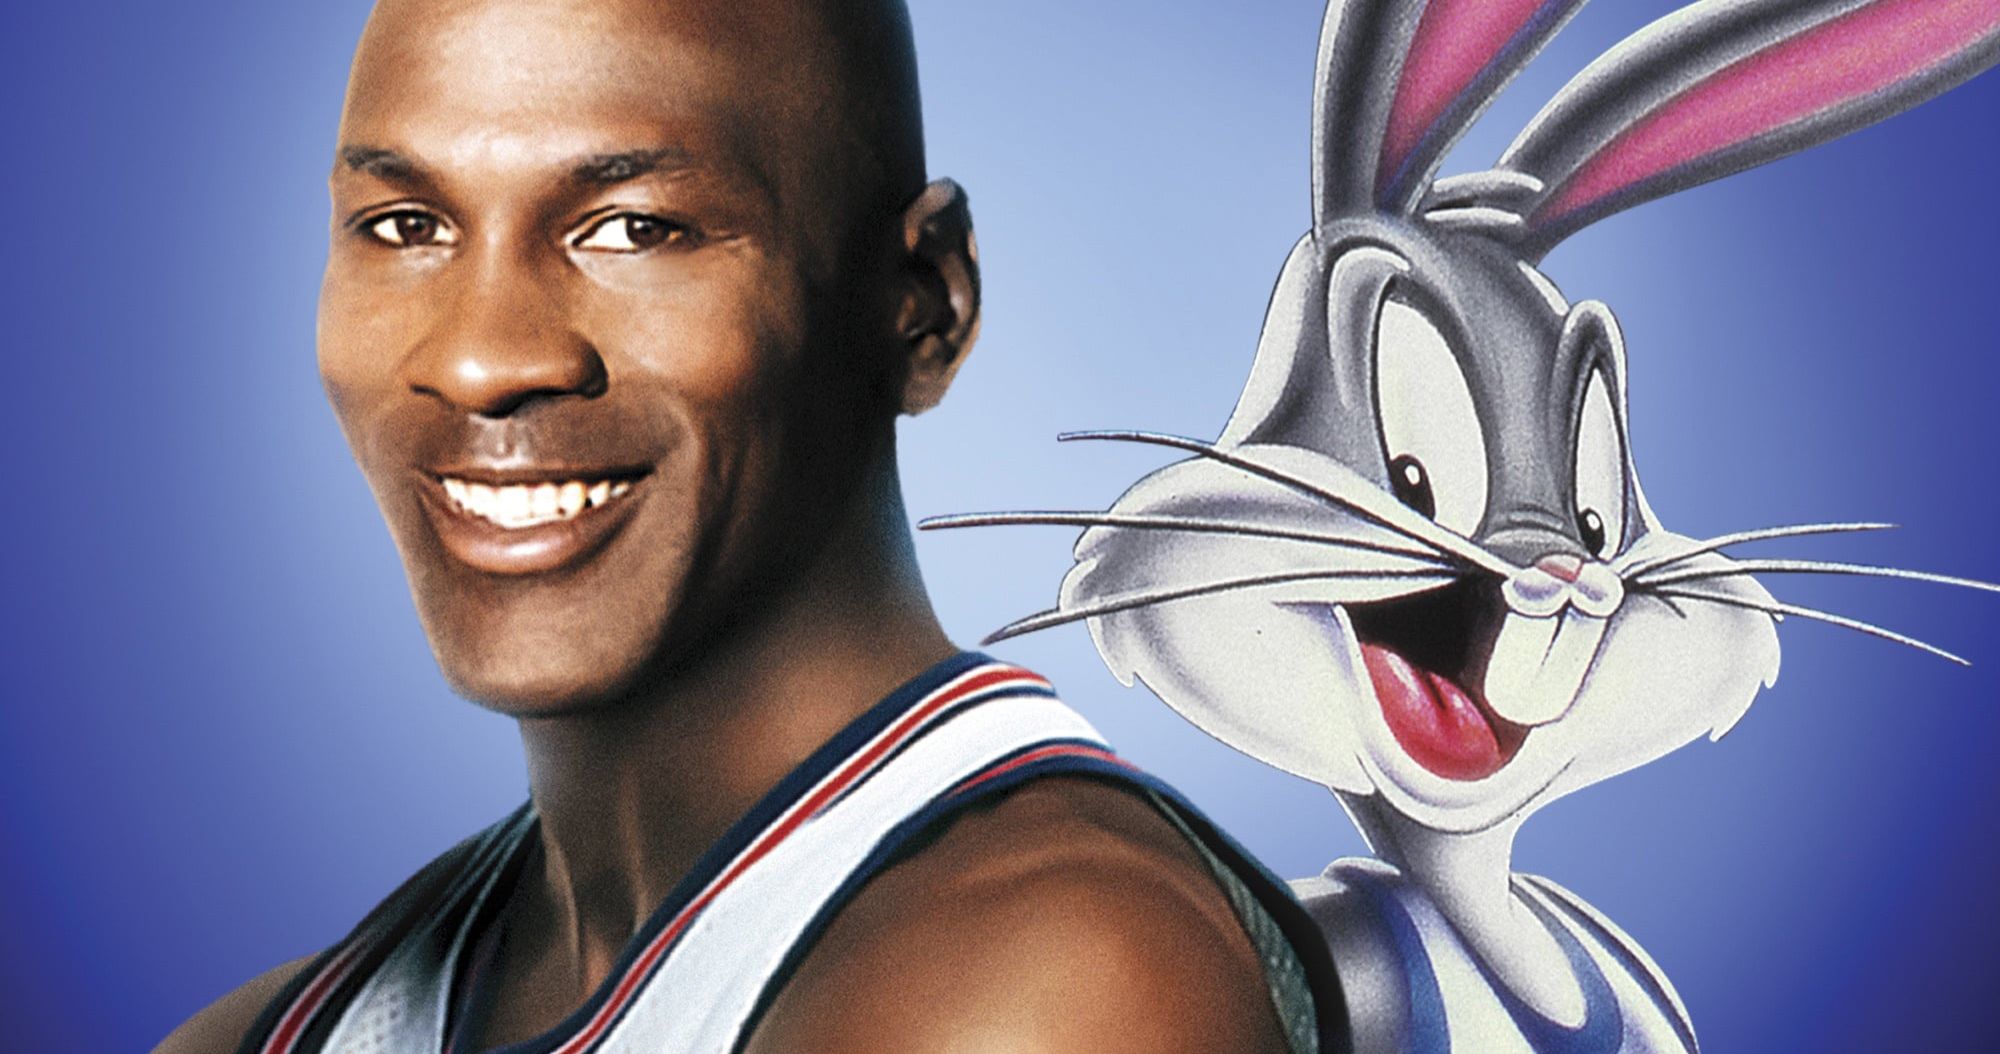 Space Jam Was Released in Theaters 25 Years Ago Today